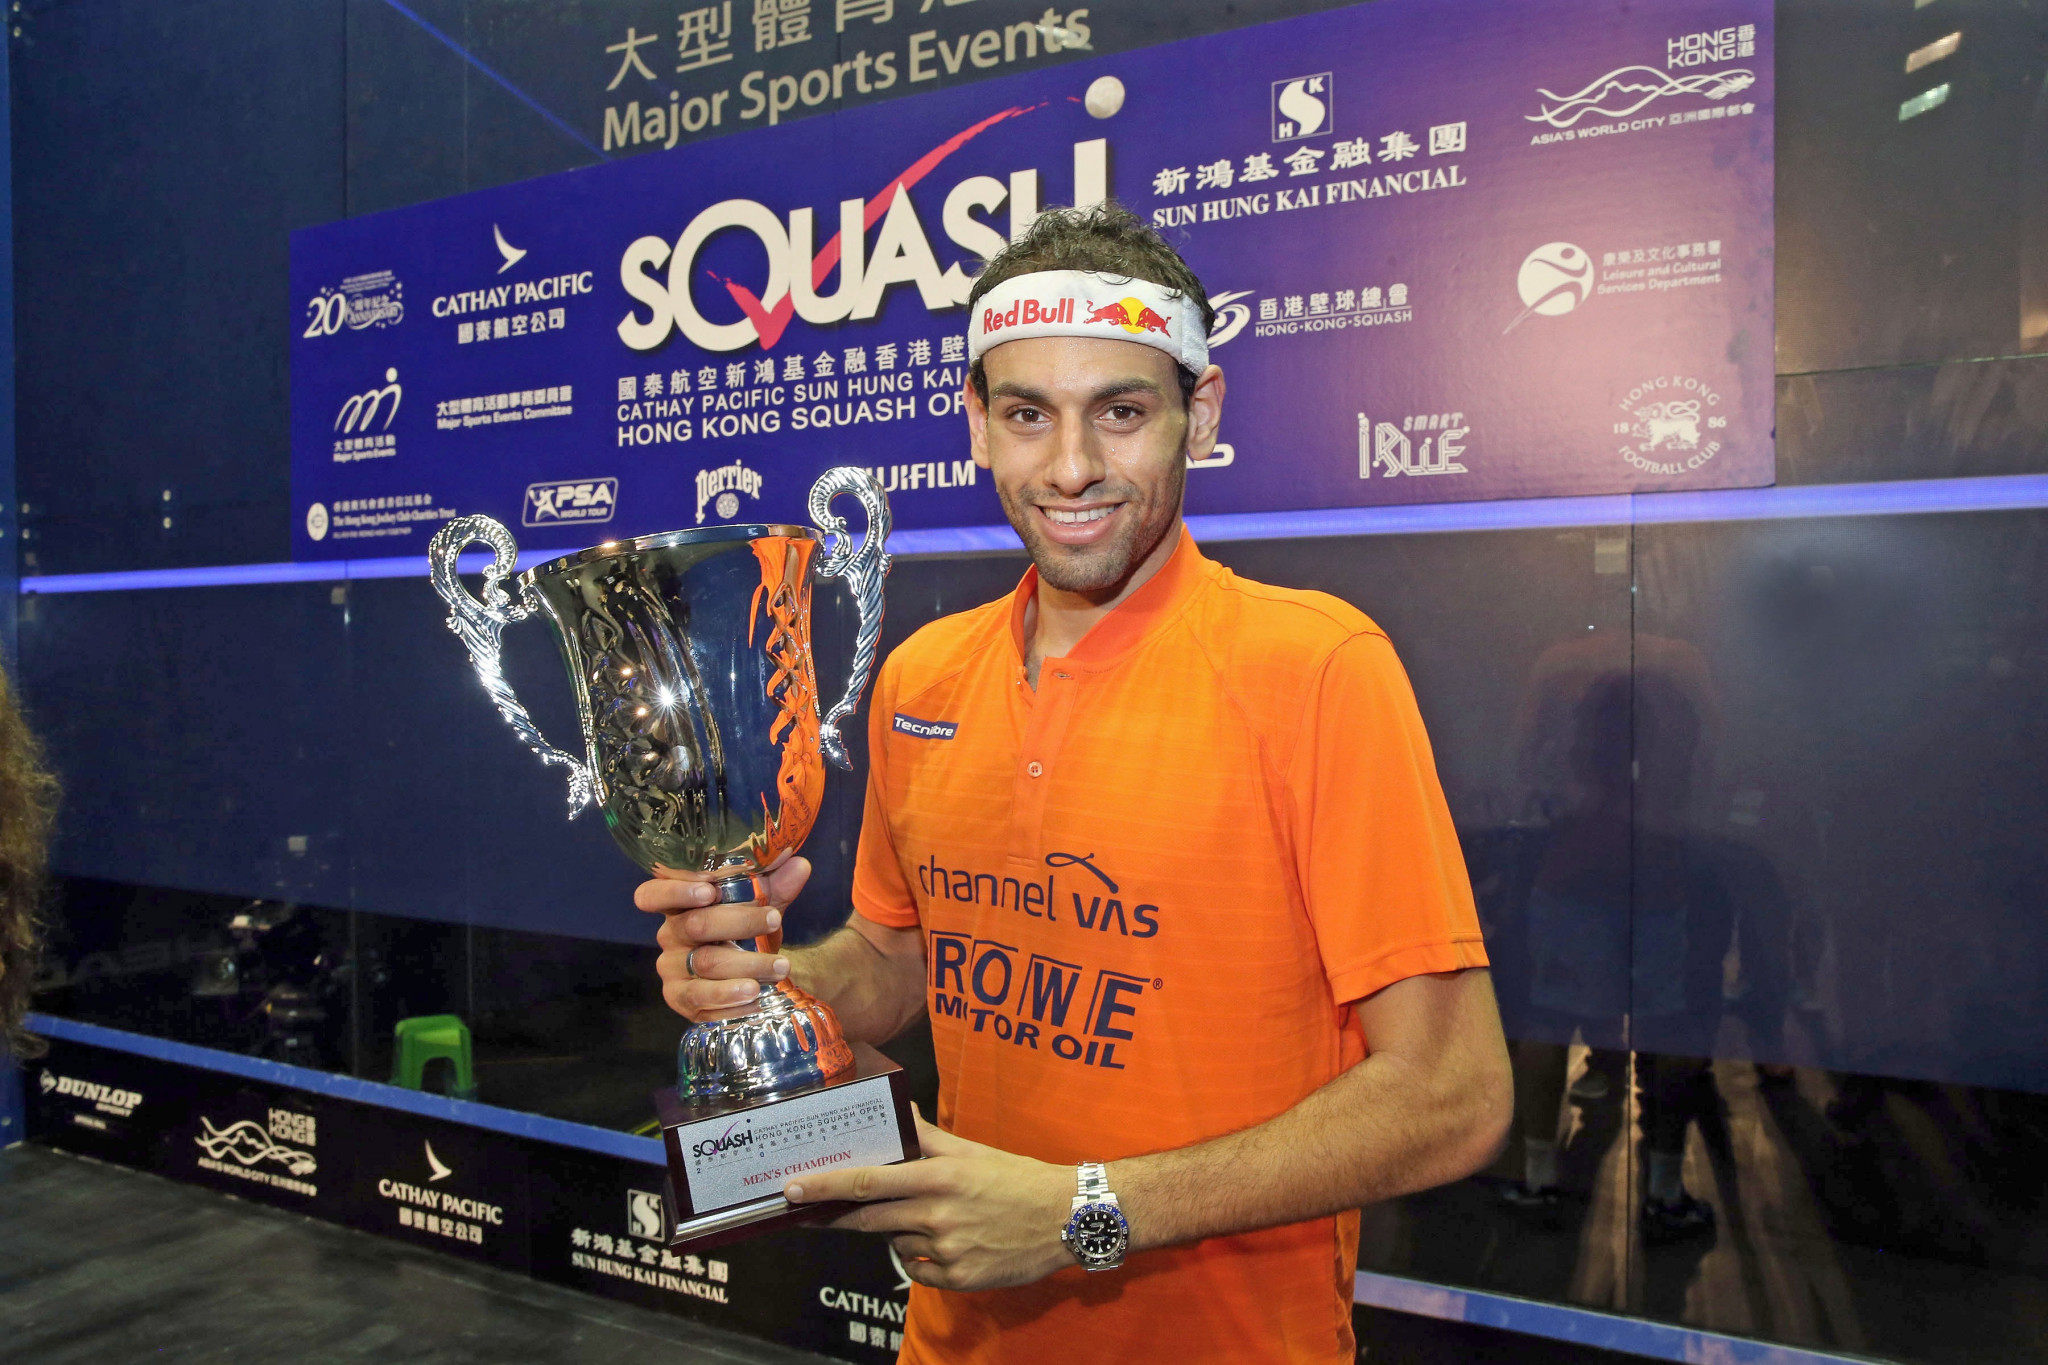 Egypt's Mohamed Elshorbagy captured his third successive PSA World Tour title with victory at the Hong Kong Open ©PSA